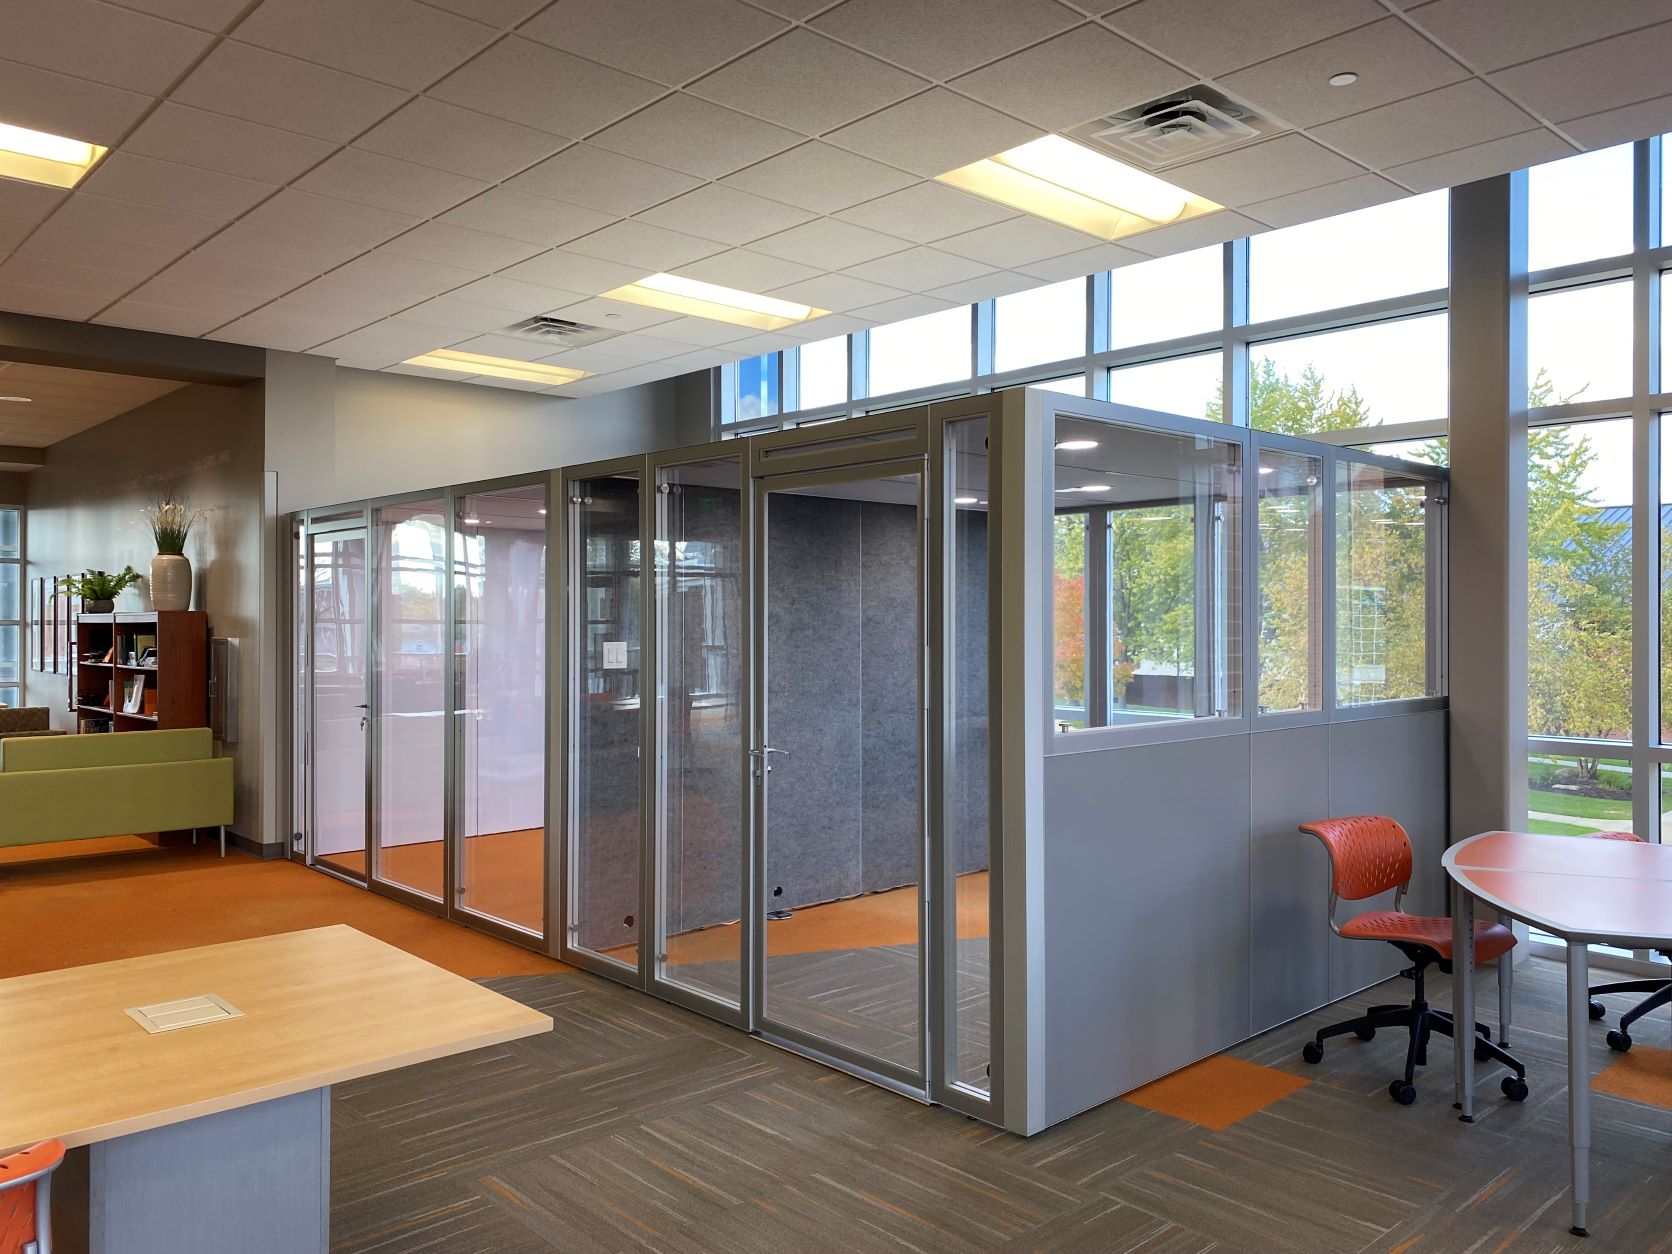 Photo of YOURspace Privacy Pods within Indiana Tech's library. Photo is at an angled view.